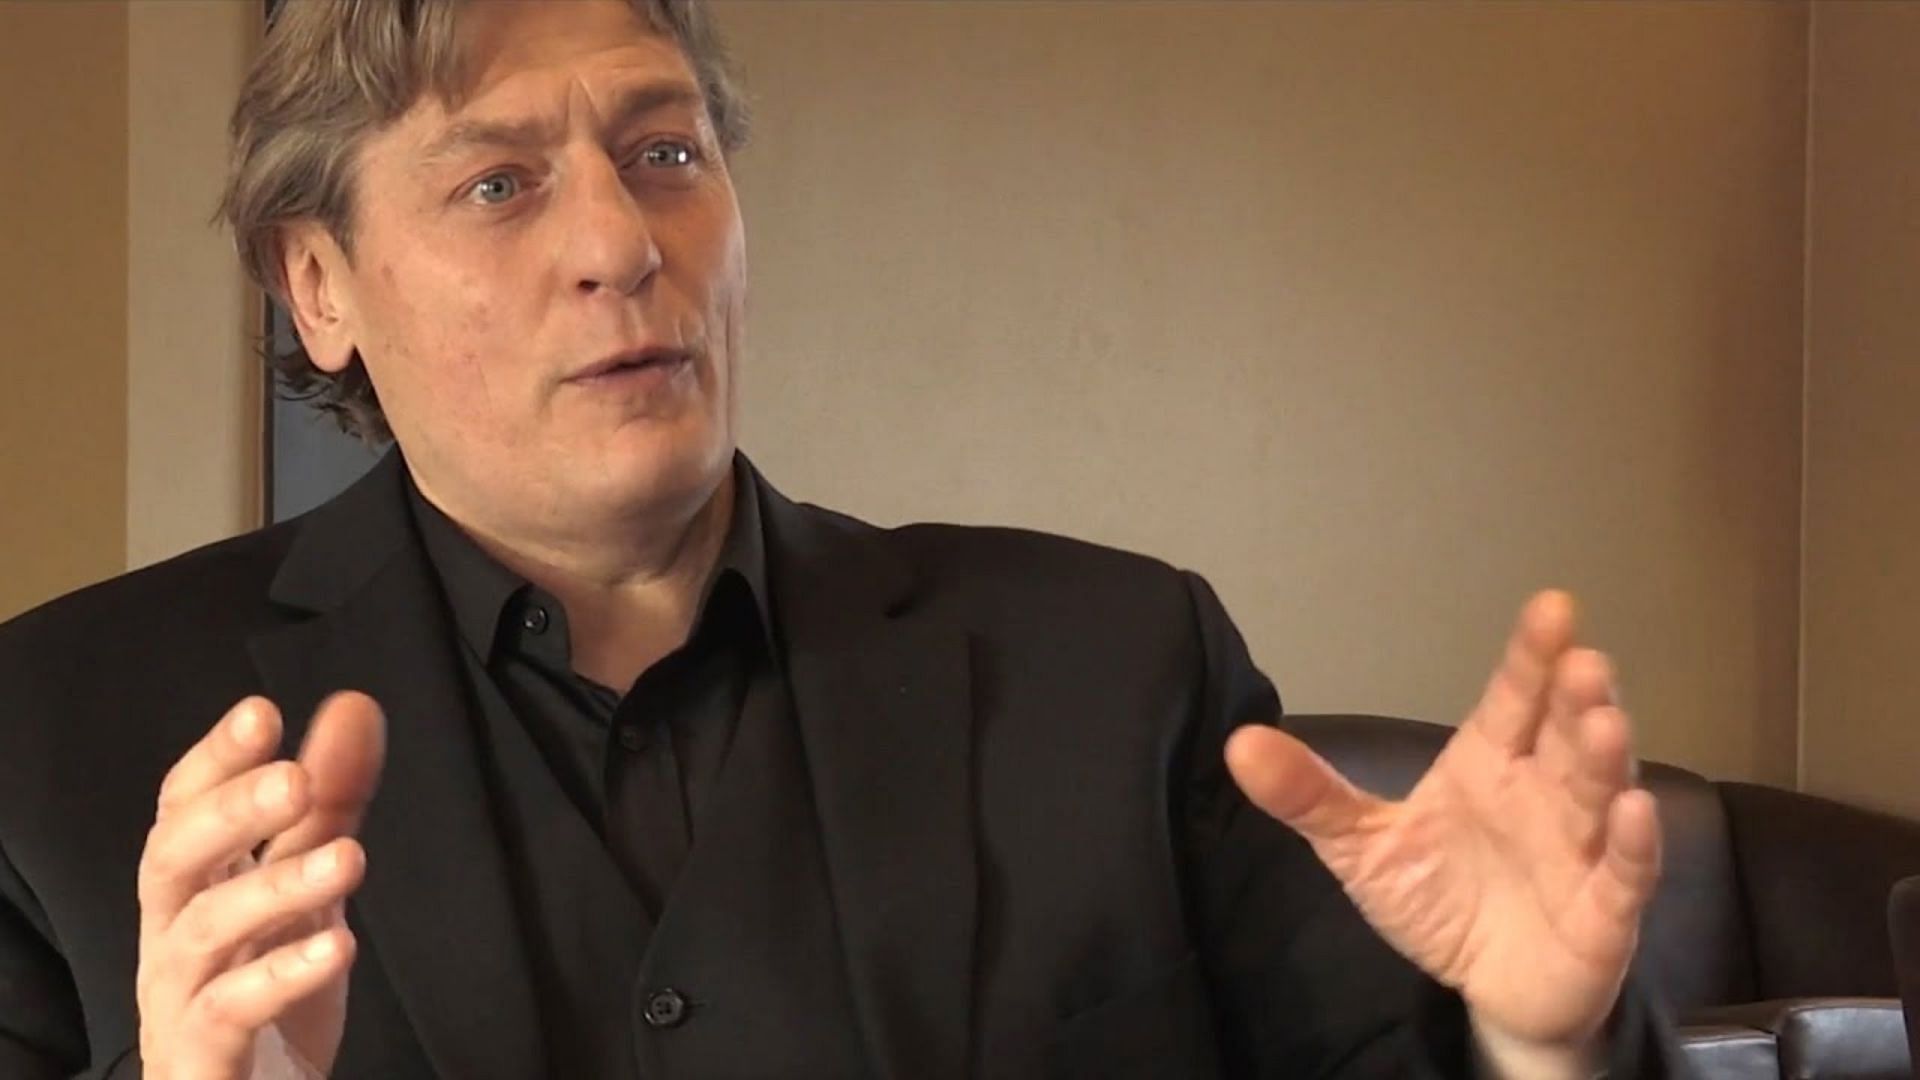 William Regal worked in WWE for 21 years